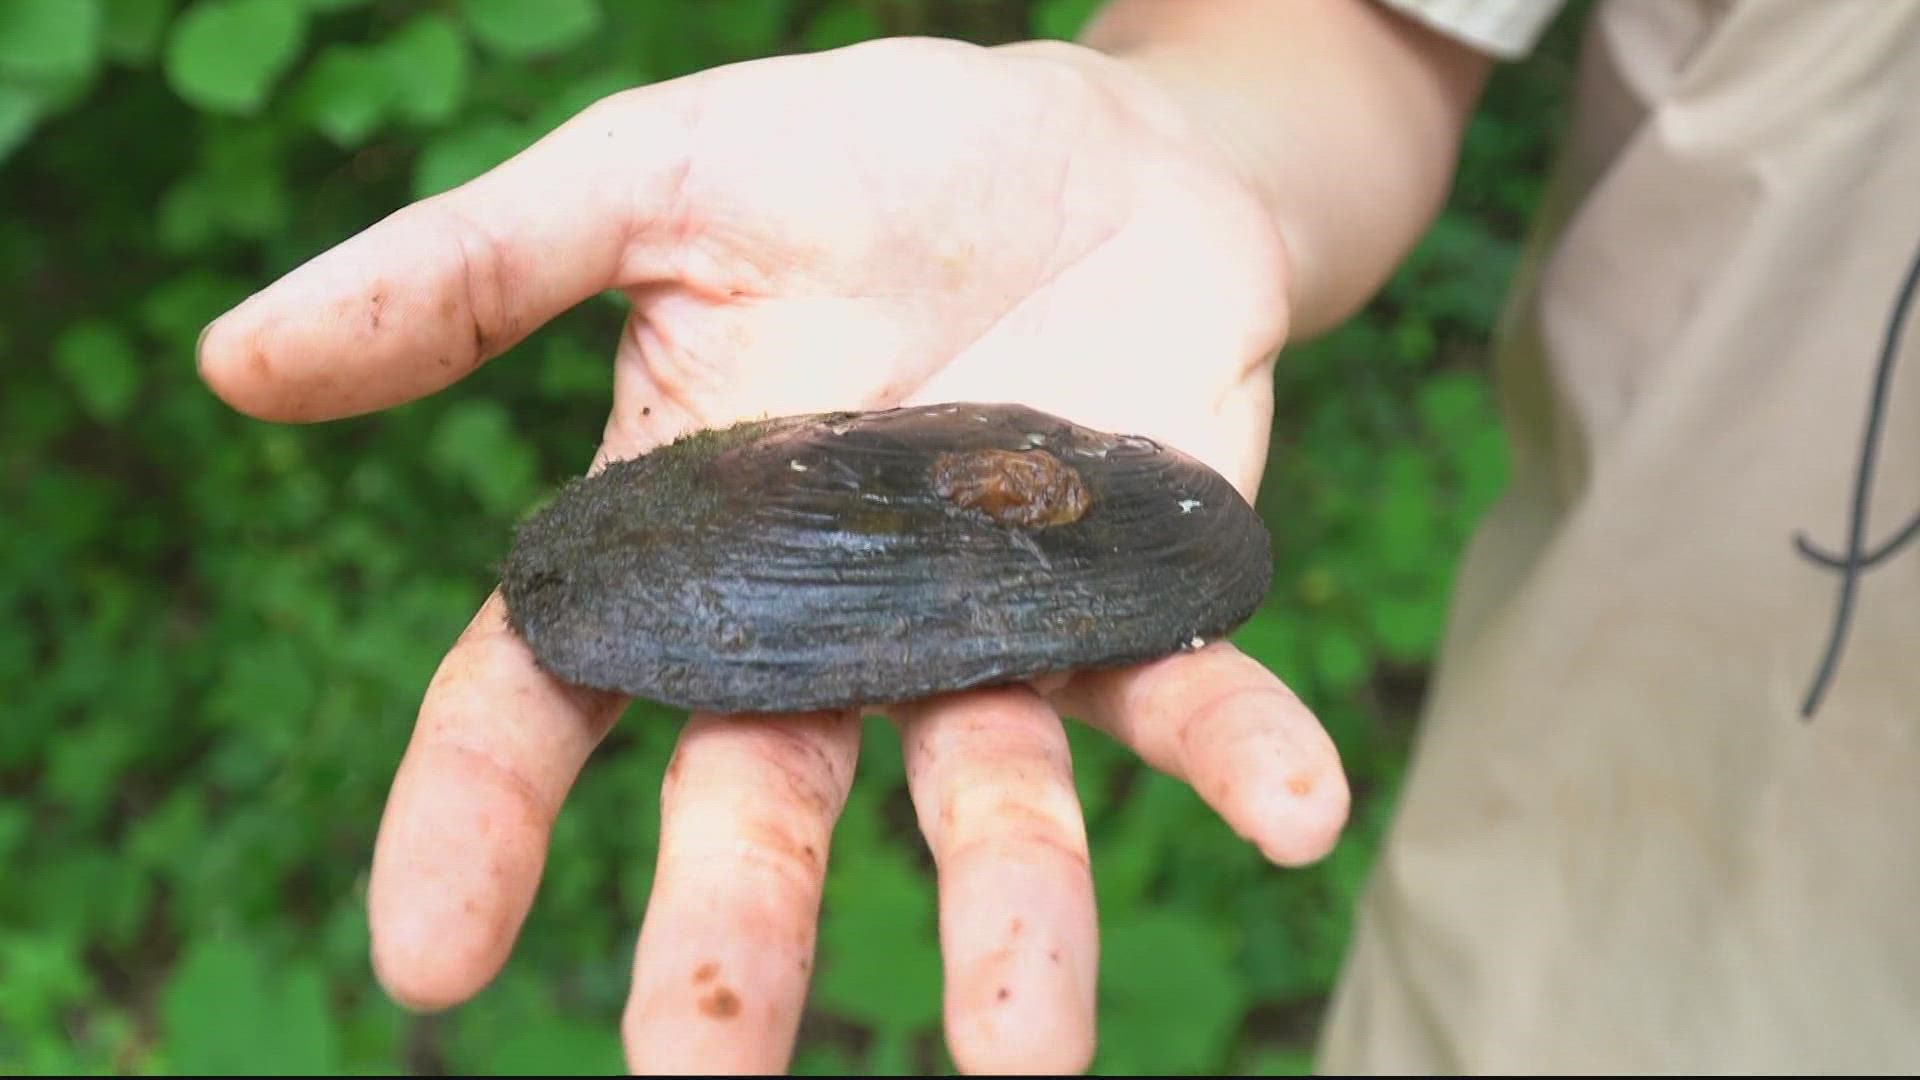 We've already lost over 90% of the freshwater mussel population in the Chesapeake Bay Watershed as a result of a number of human and environmental factors.